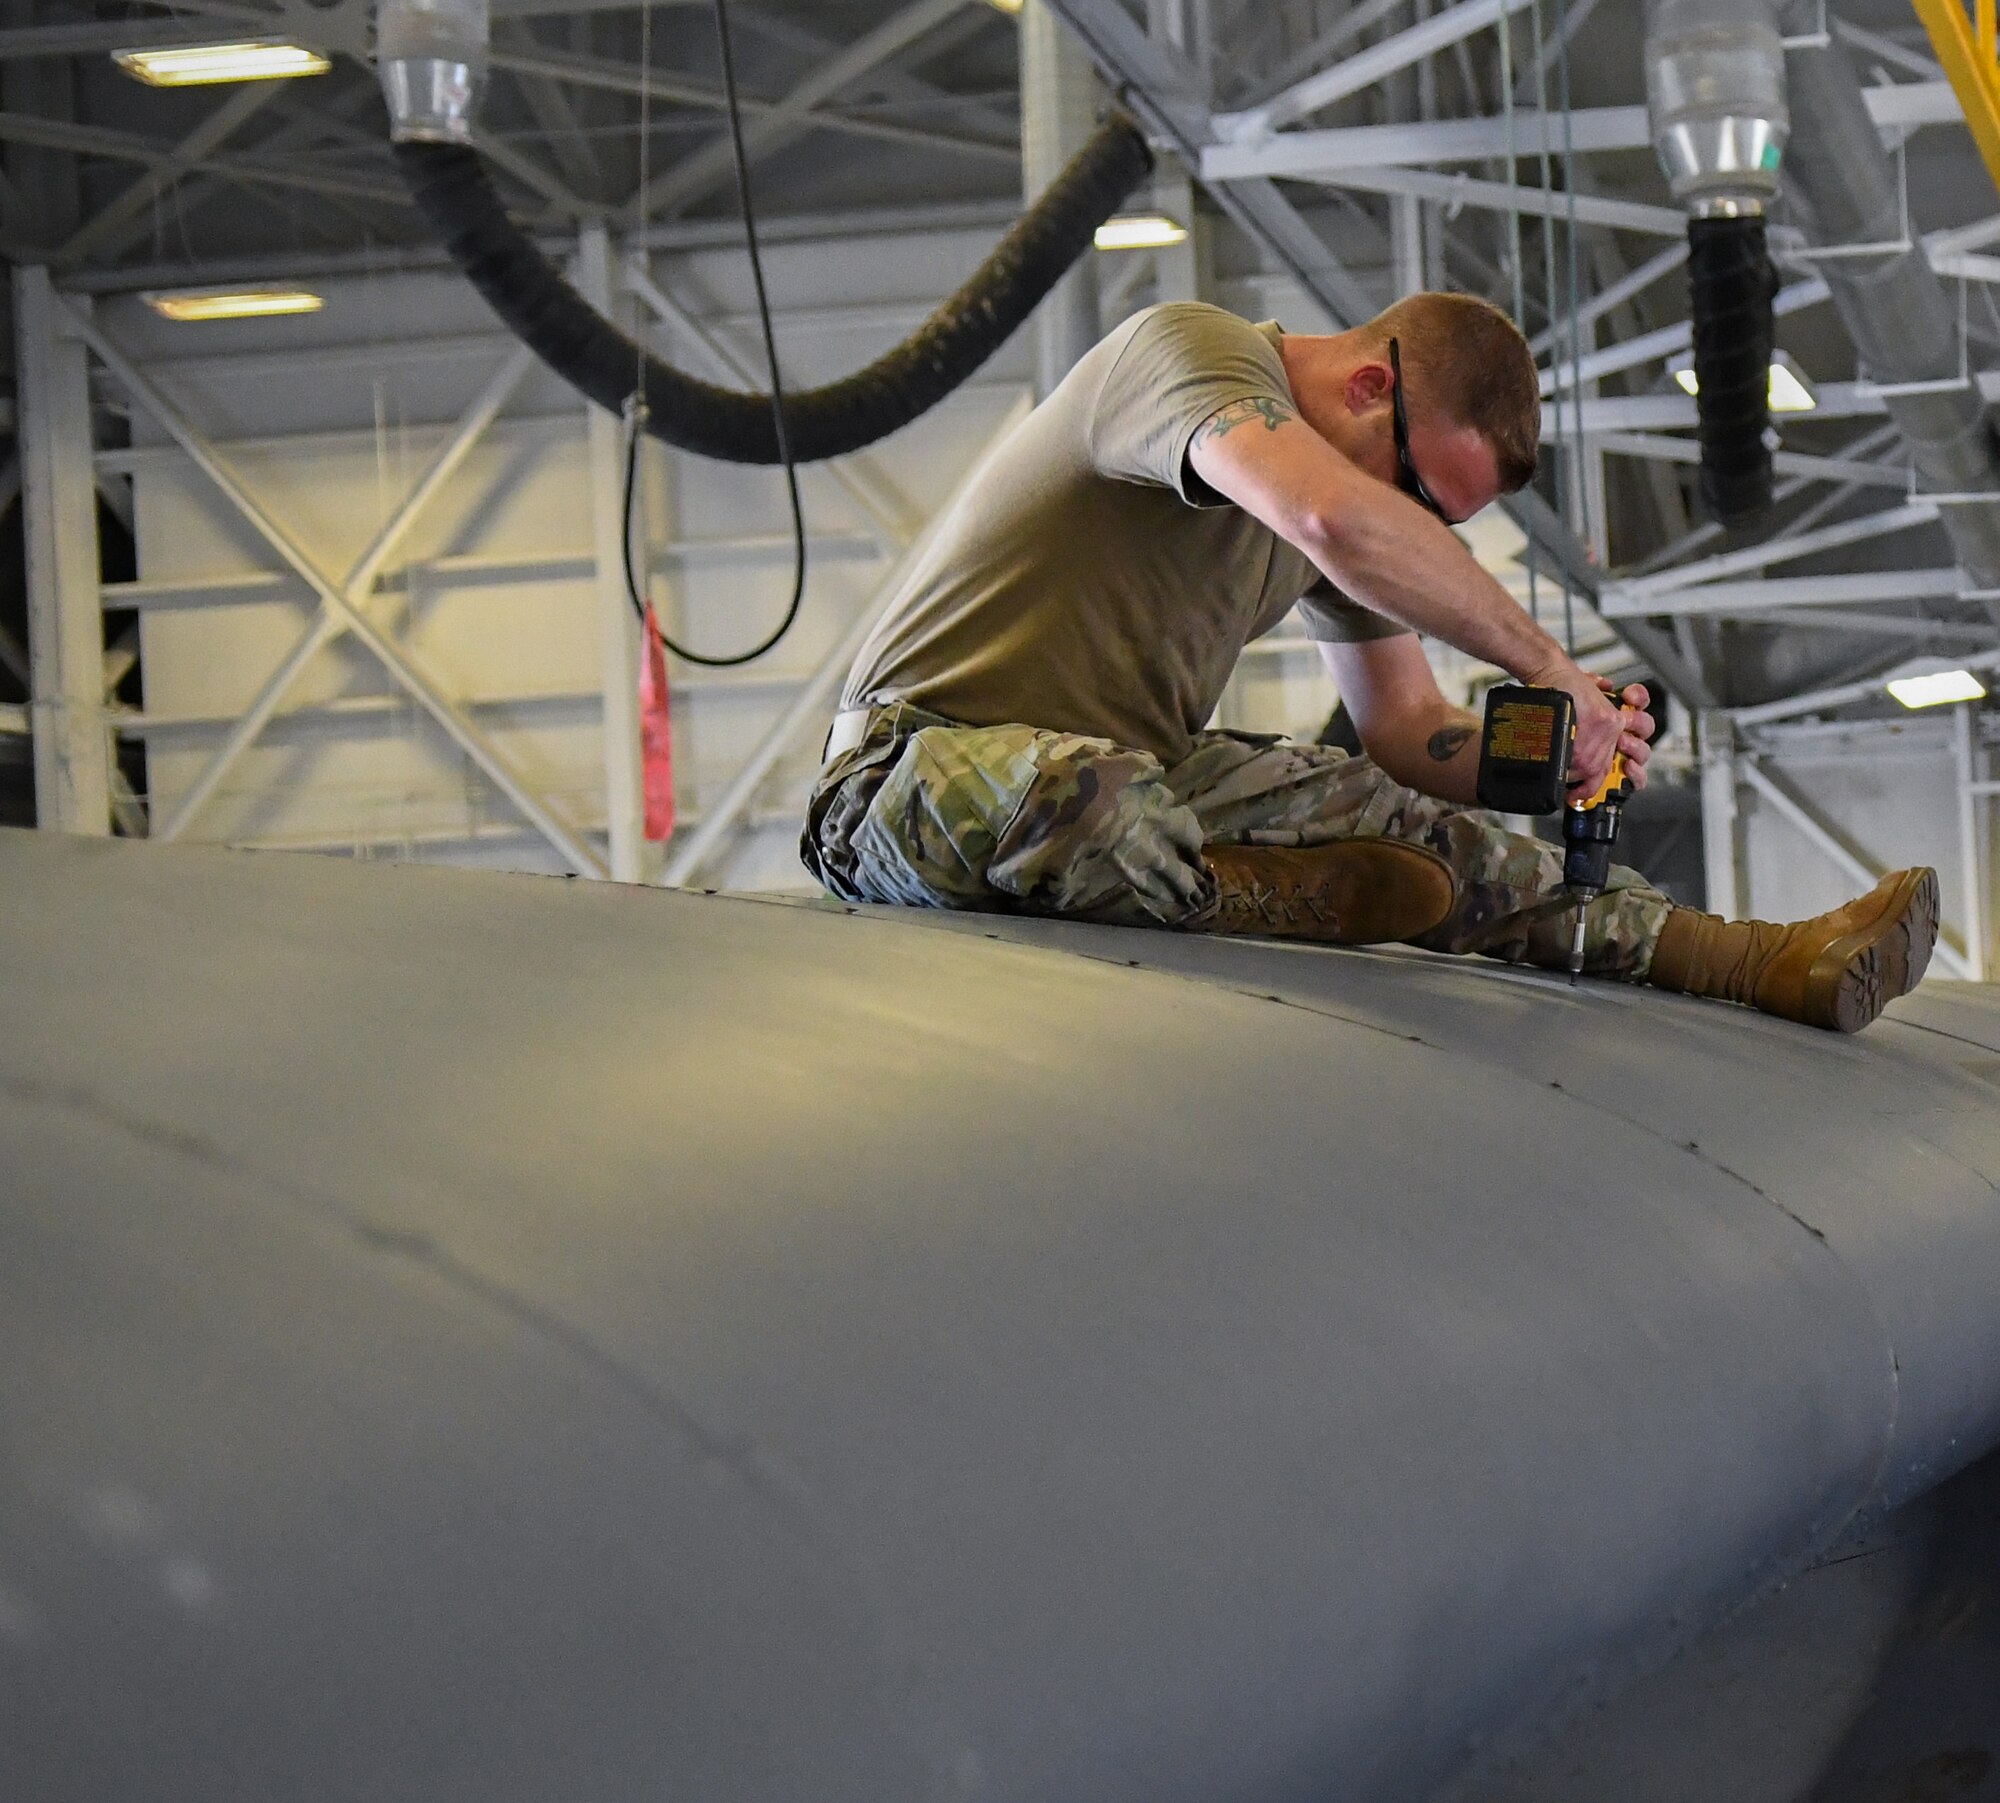 Staff Sargent Justin Realmuto, 920th Maintenance Squadron mechanic, finishes reattaching a newly repaired HC-130J Combat King II leading edge panel after it encountered a bird strike and required repairs at Patrick Space Force Base, Fla., April 26, 2022. (U.S. Air Force photo by Staff Sgt. Darius Sostre-Miroir)